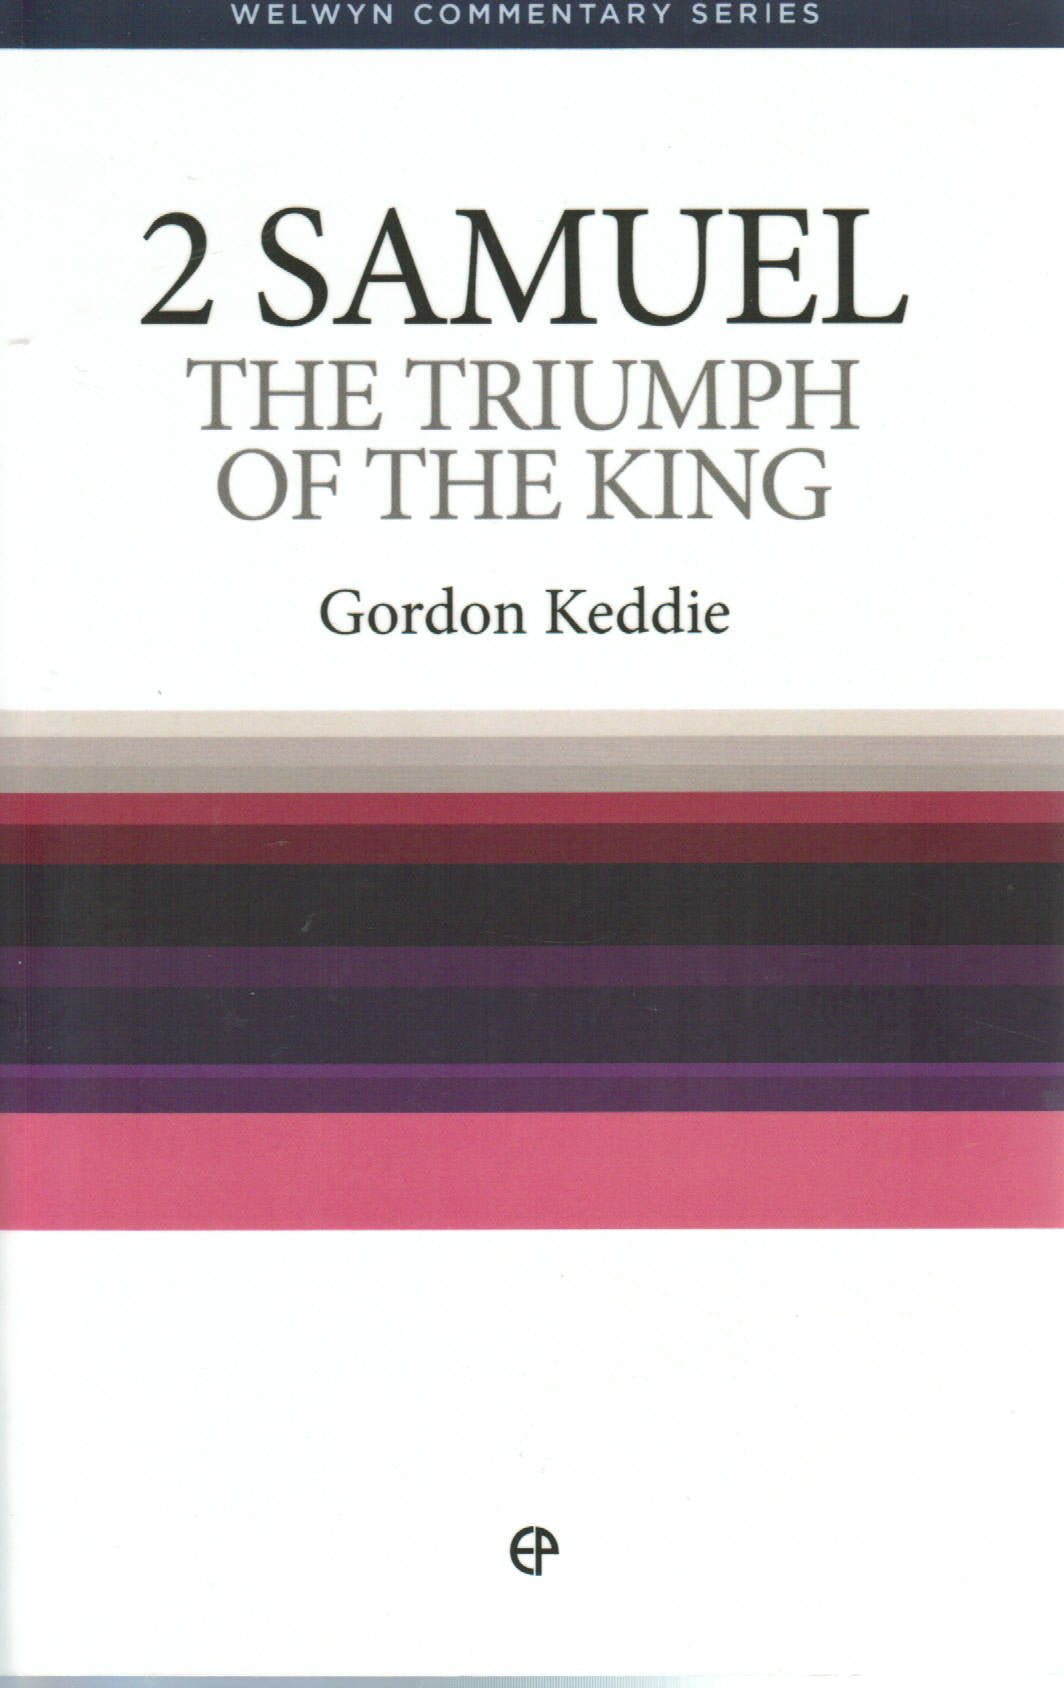 Welwyn Commentary Series - 2 Samuel: The Triumph of the King